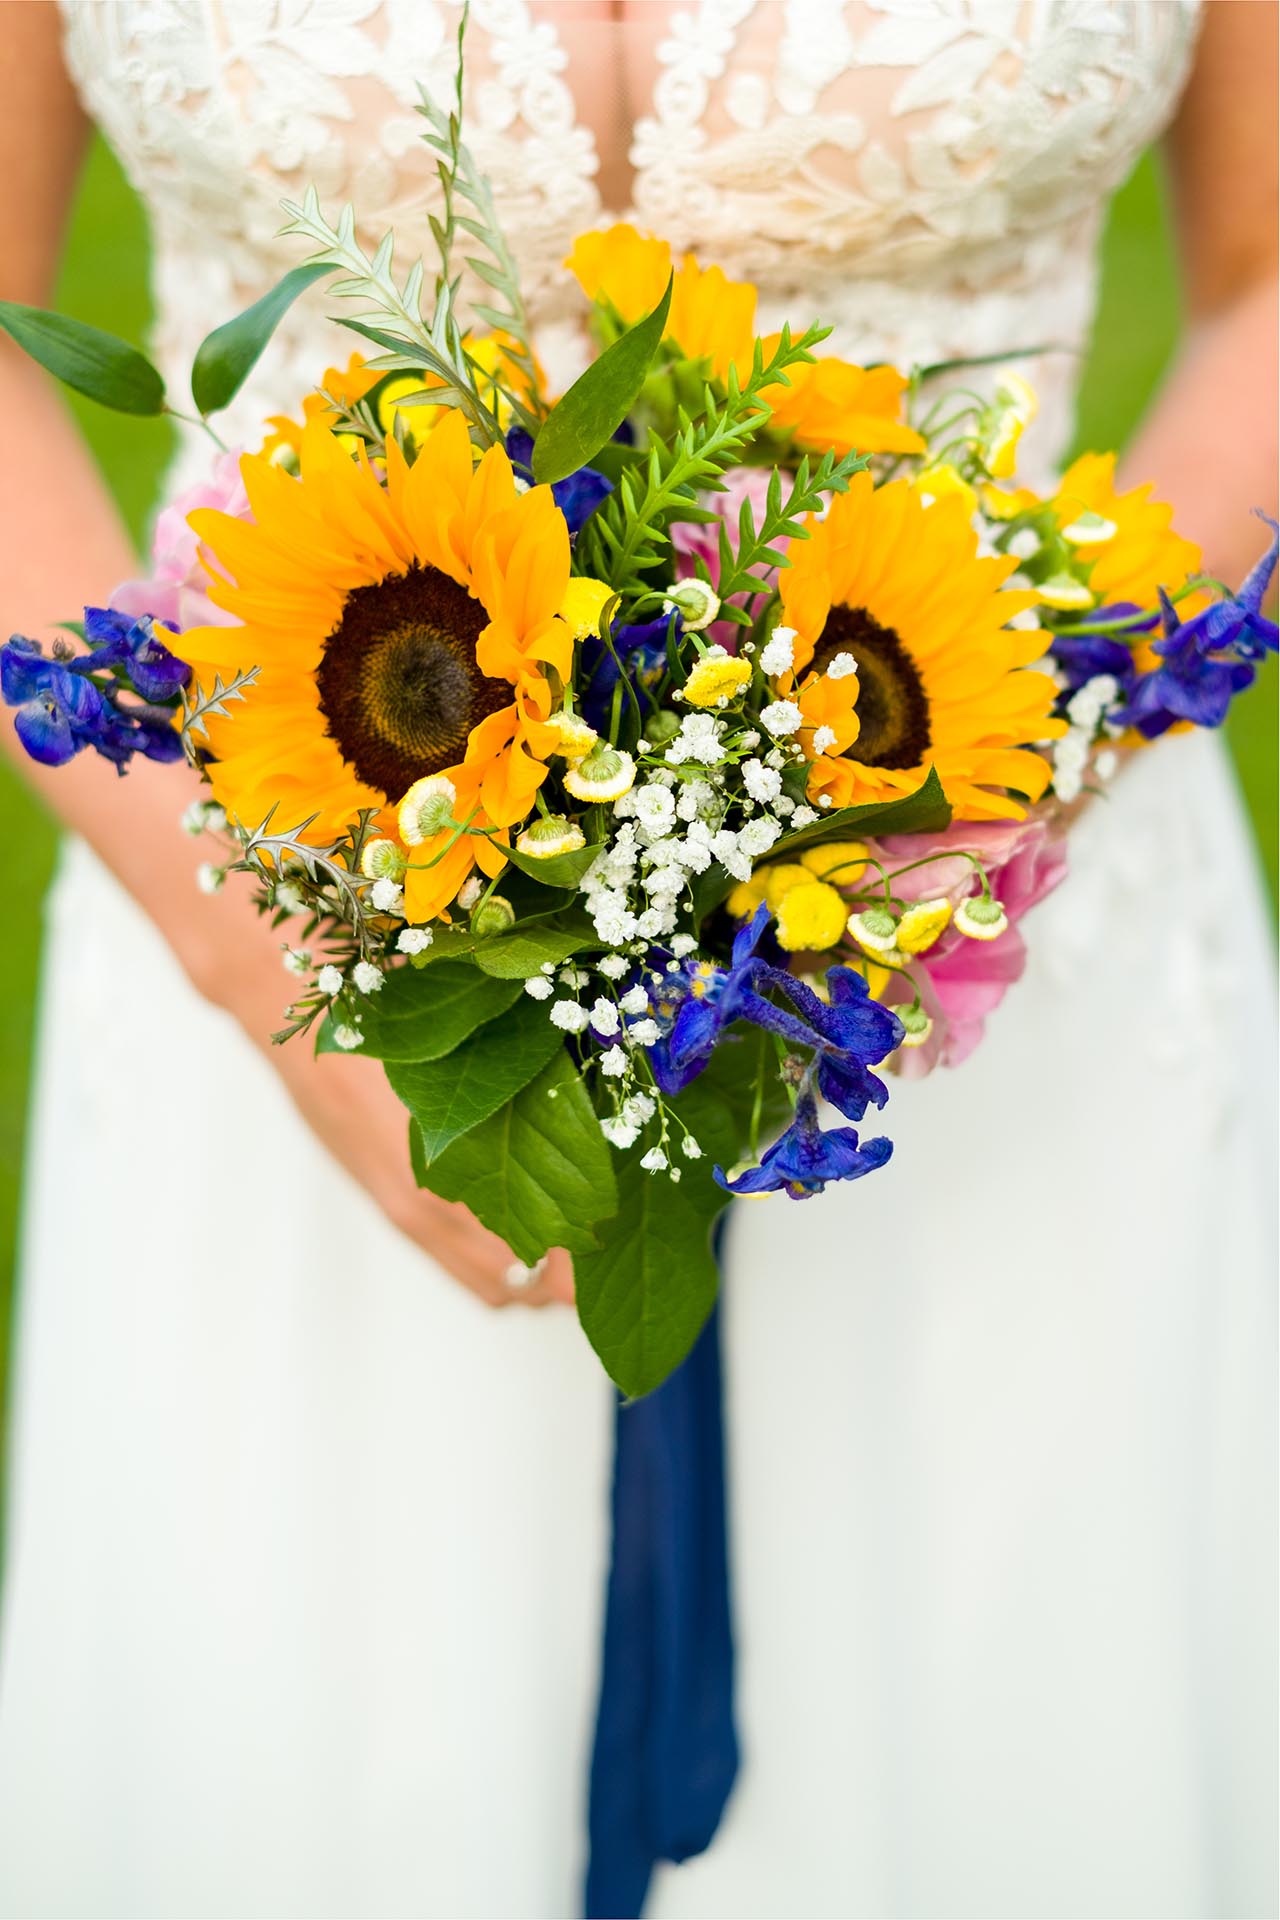 Summer bridal bouquet with sunflowers at a Leez Priory wedding, Great Leighs, Chelmsford, Essex